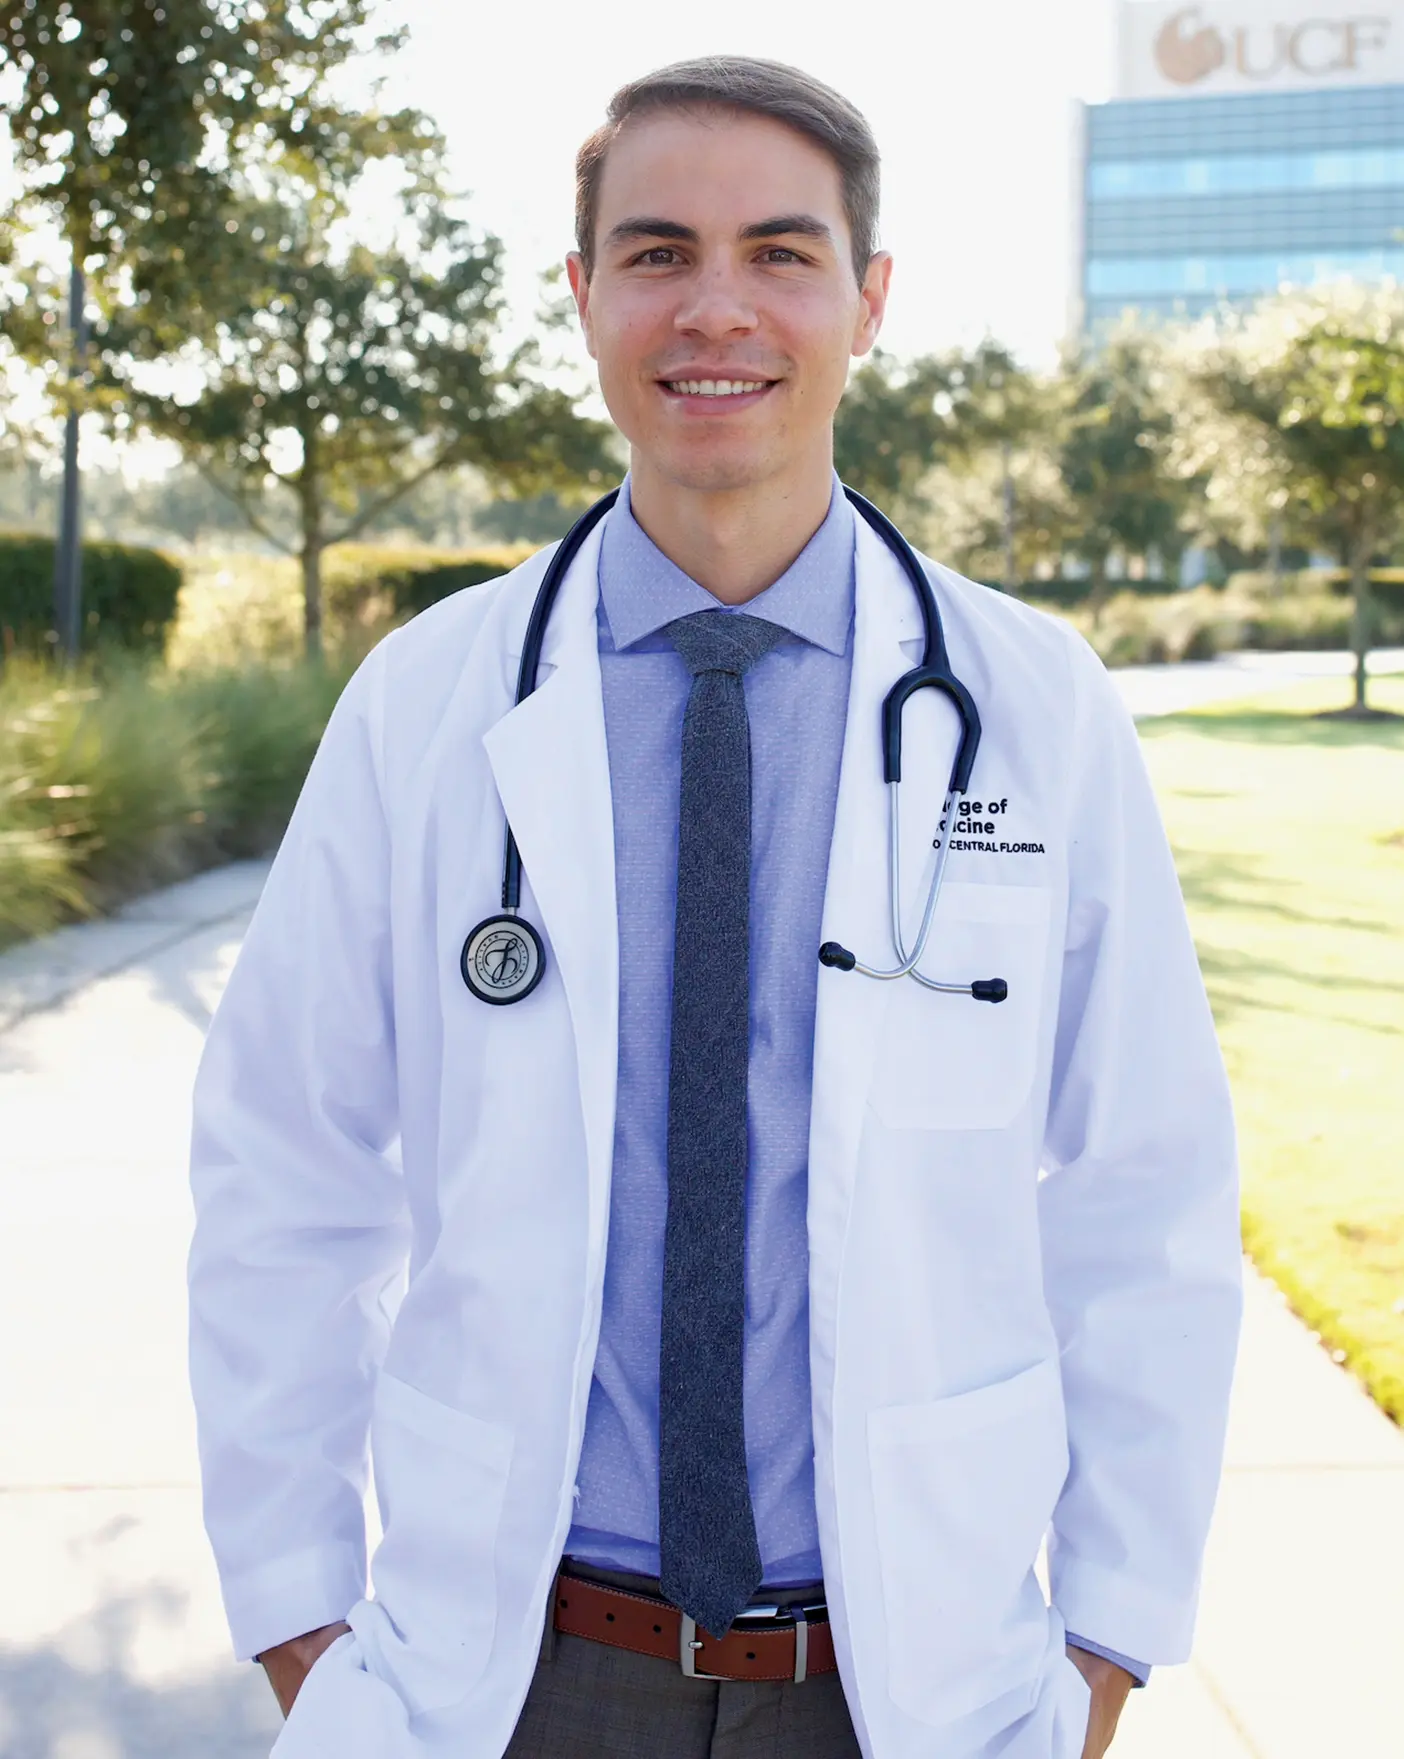 Thomas Knapp poses in a white doctor's coat and stethoscope. 